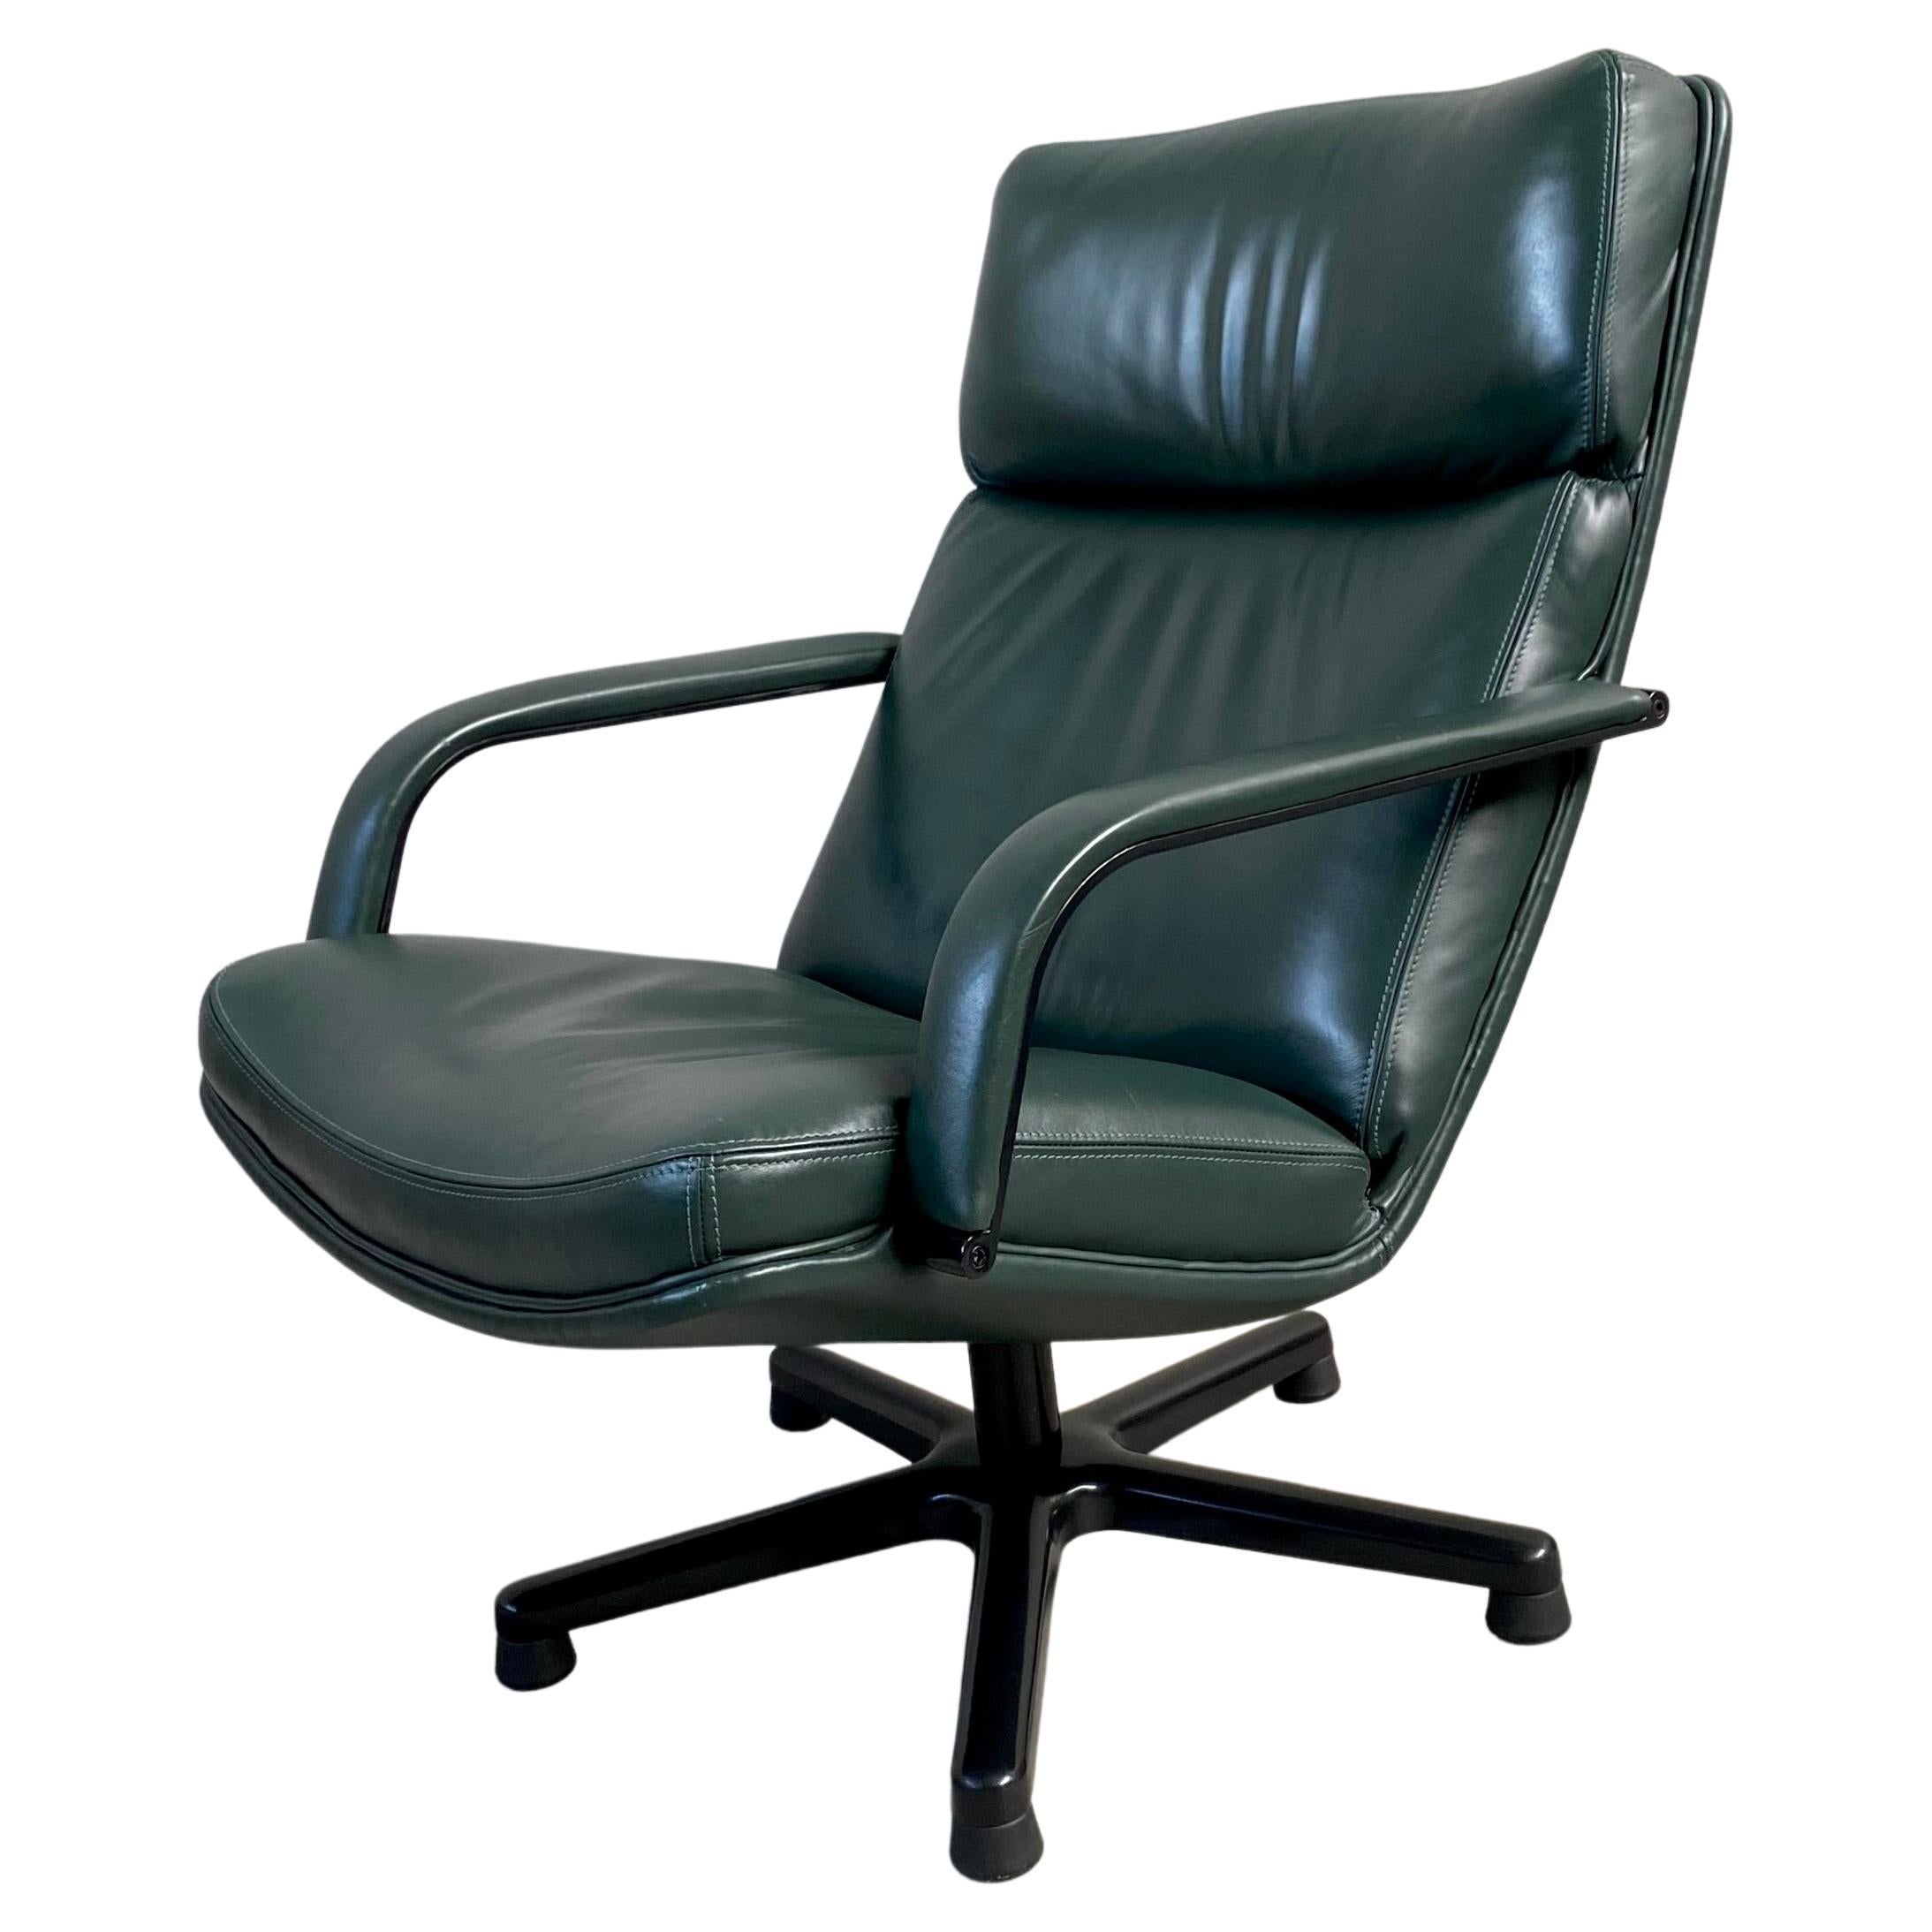 Forrest Green Leather "F141" lounge Chair by Geoffrey Harcourt for Artifort 1978 For Sale